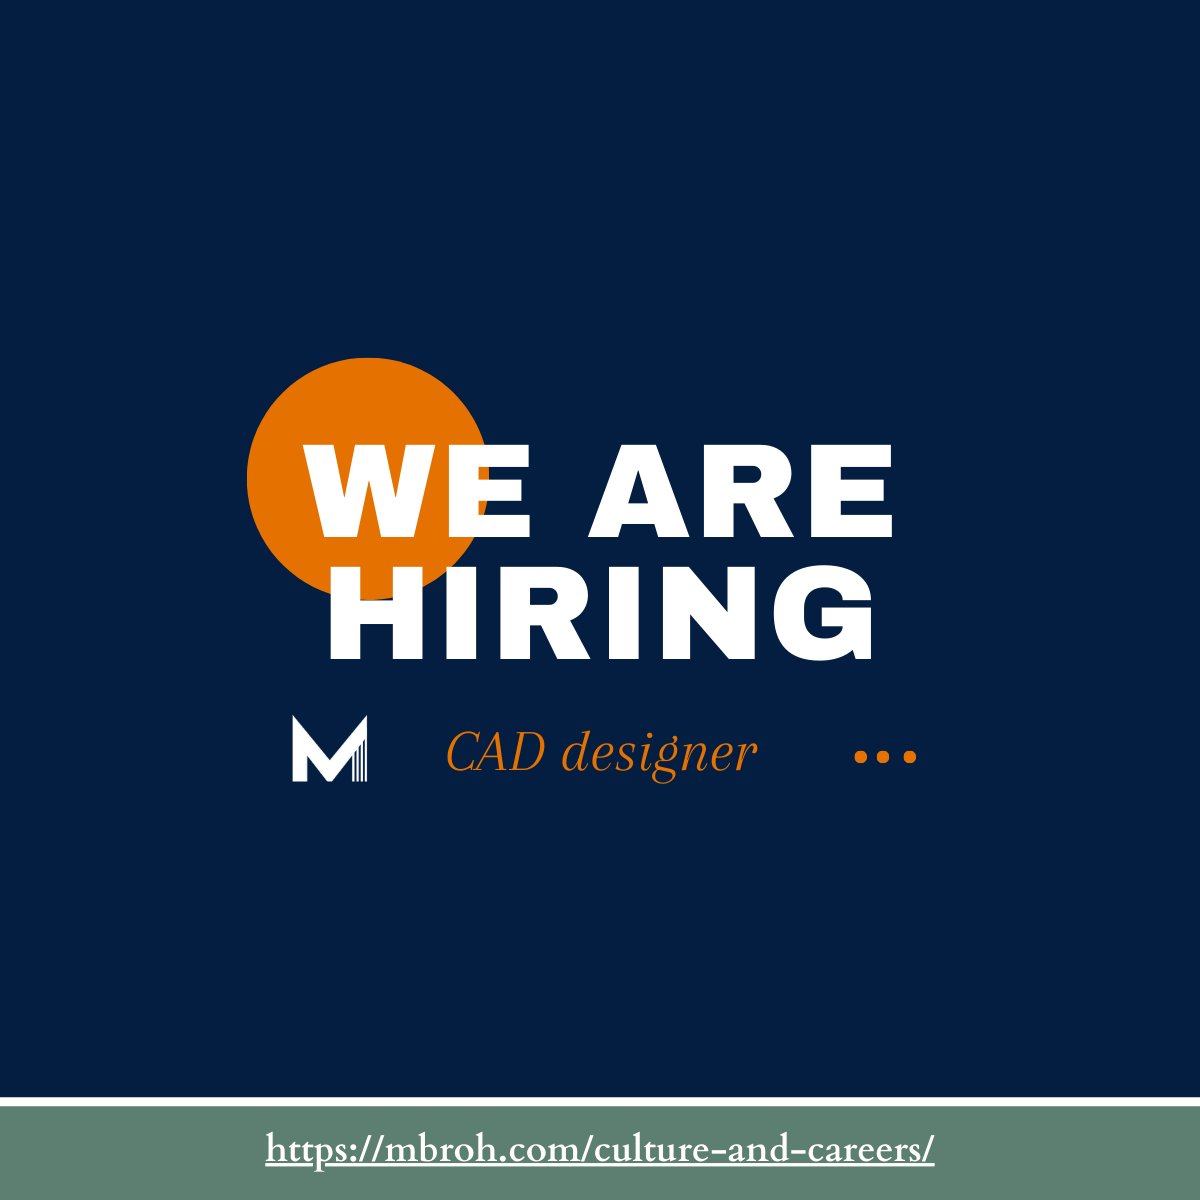 We want to add a #CADdesigner to our growing team in either #Houston or #Dallas! Click the link below to learn more. Come work with Team Mbroh- we're doing amazing things every day! indeedhi.re/3JvC4k7

#HiringNow #Hiring #DallasJobs #HoustonJobs #CADjobs